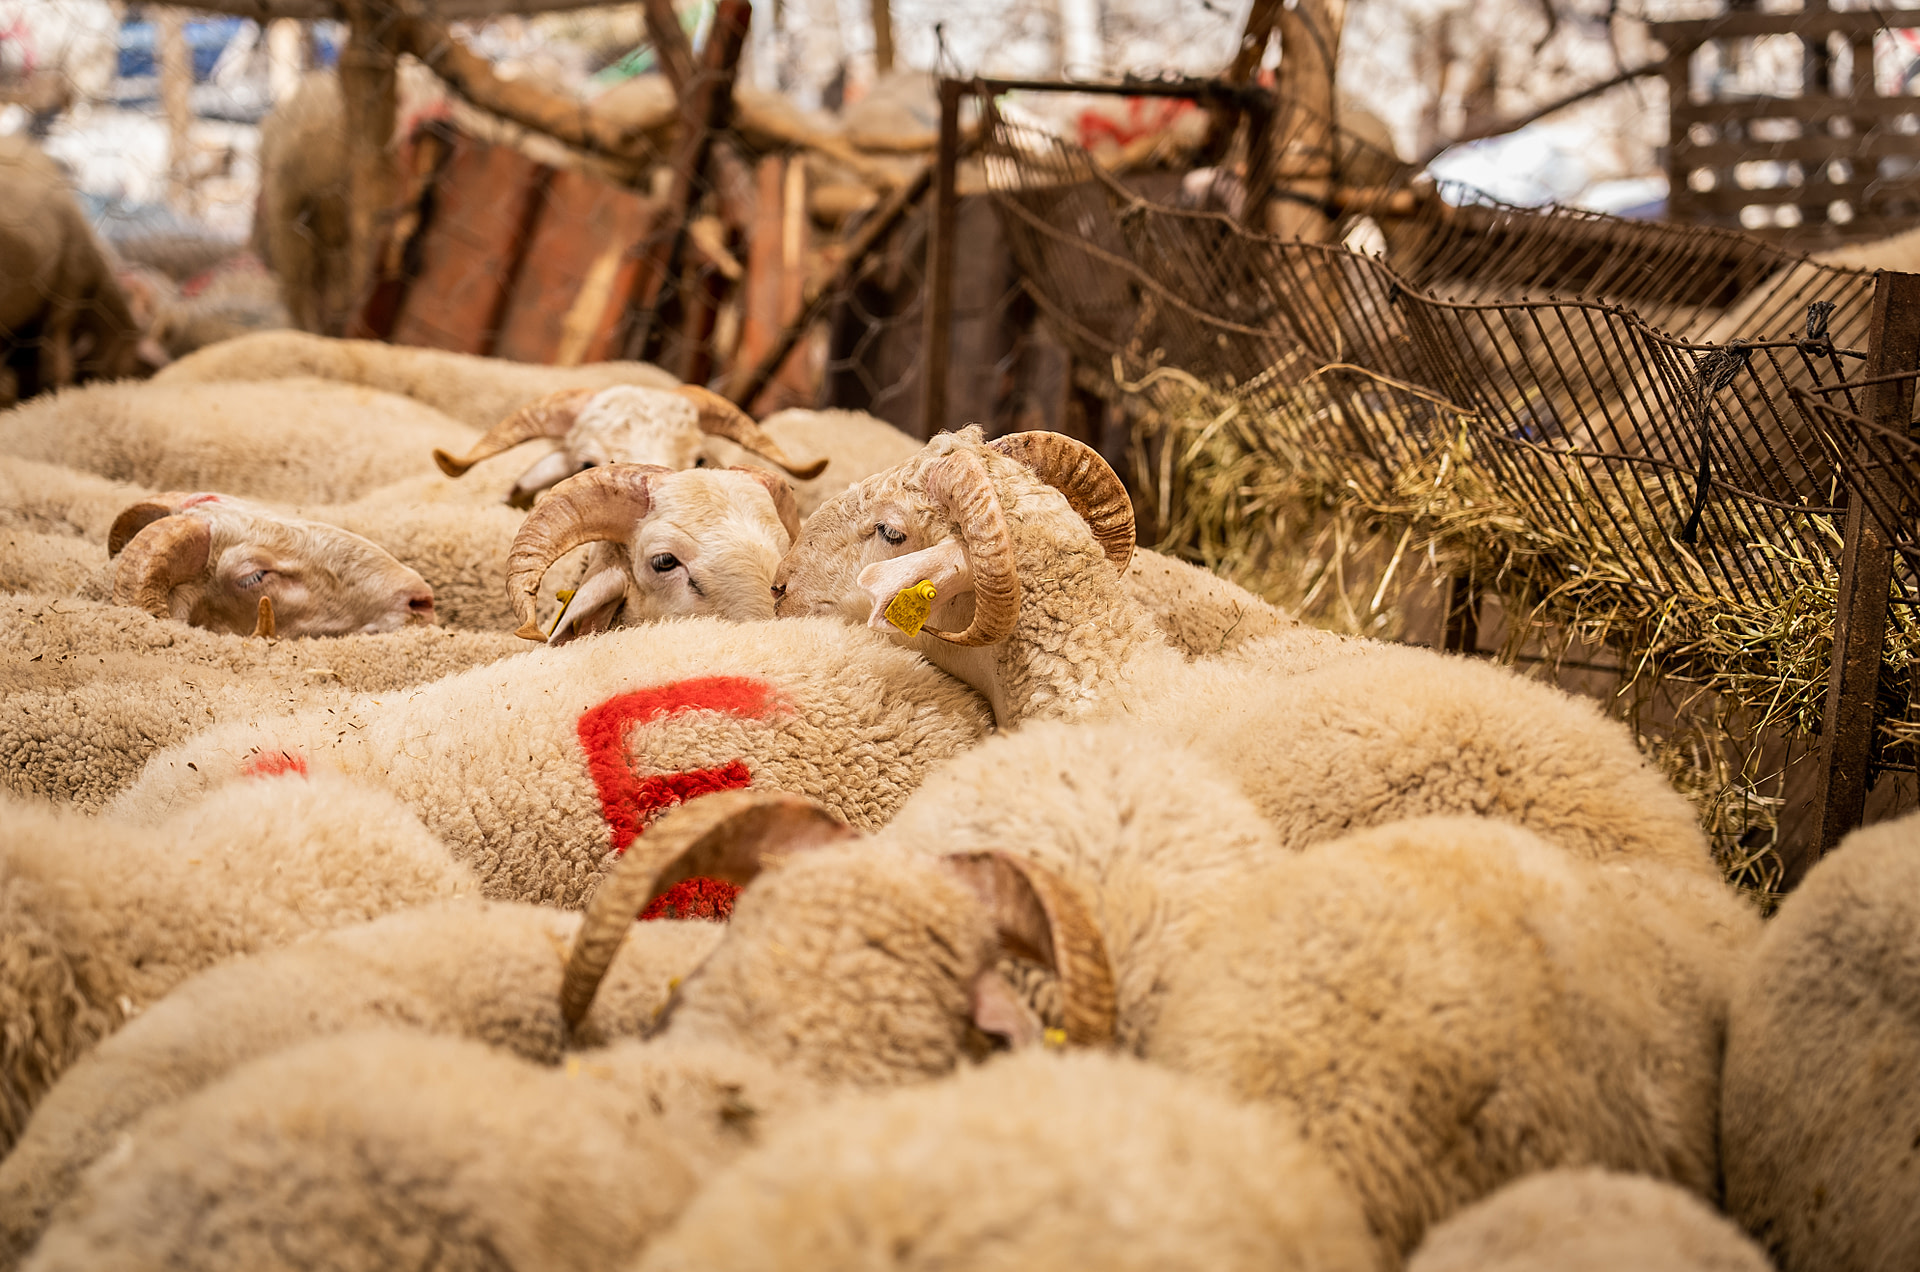 Sheep with paint marks on their bodies stand in a crowded pen at a Qurban market in Turkiye on the eve of Eid al-Adha. Qurban markets are established for the purpose of selling animals that will be sacrificed during the Eid al-Adha holiday.